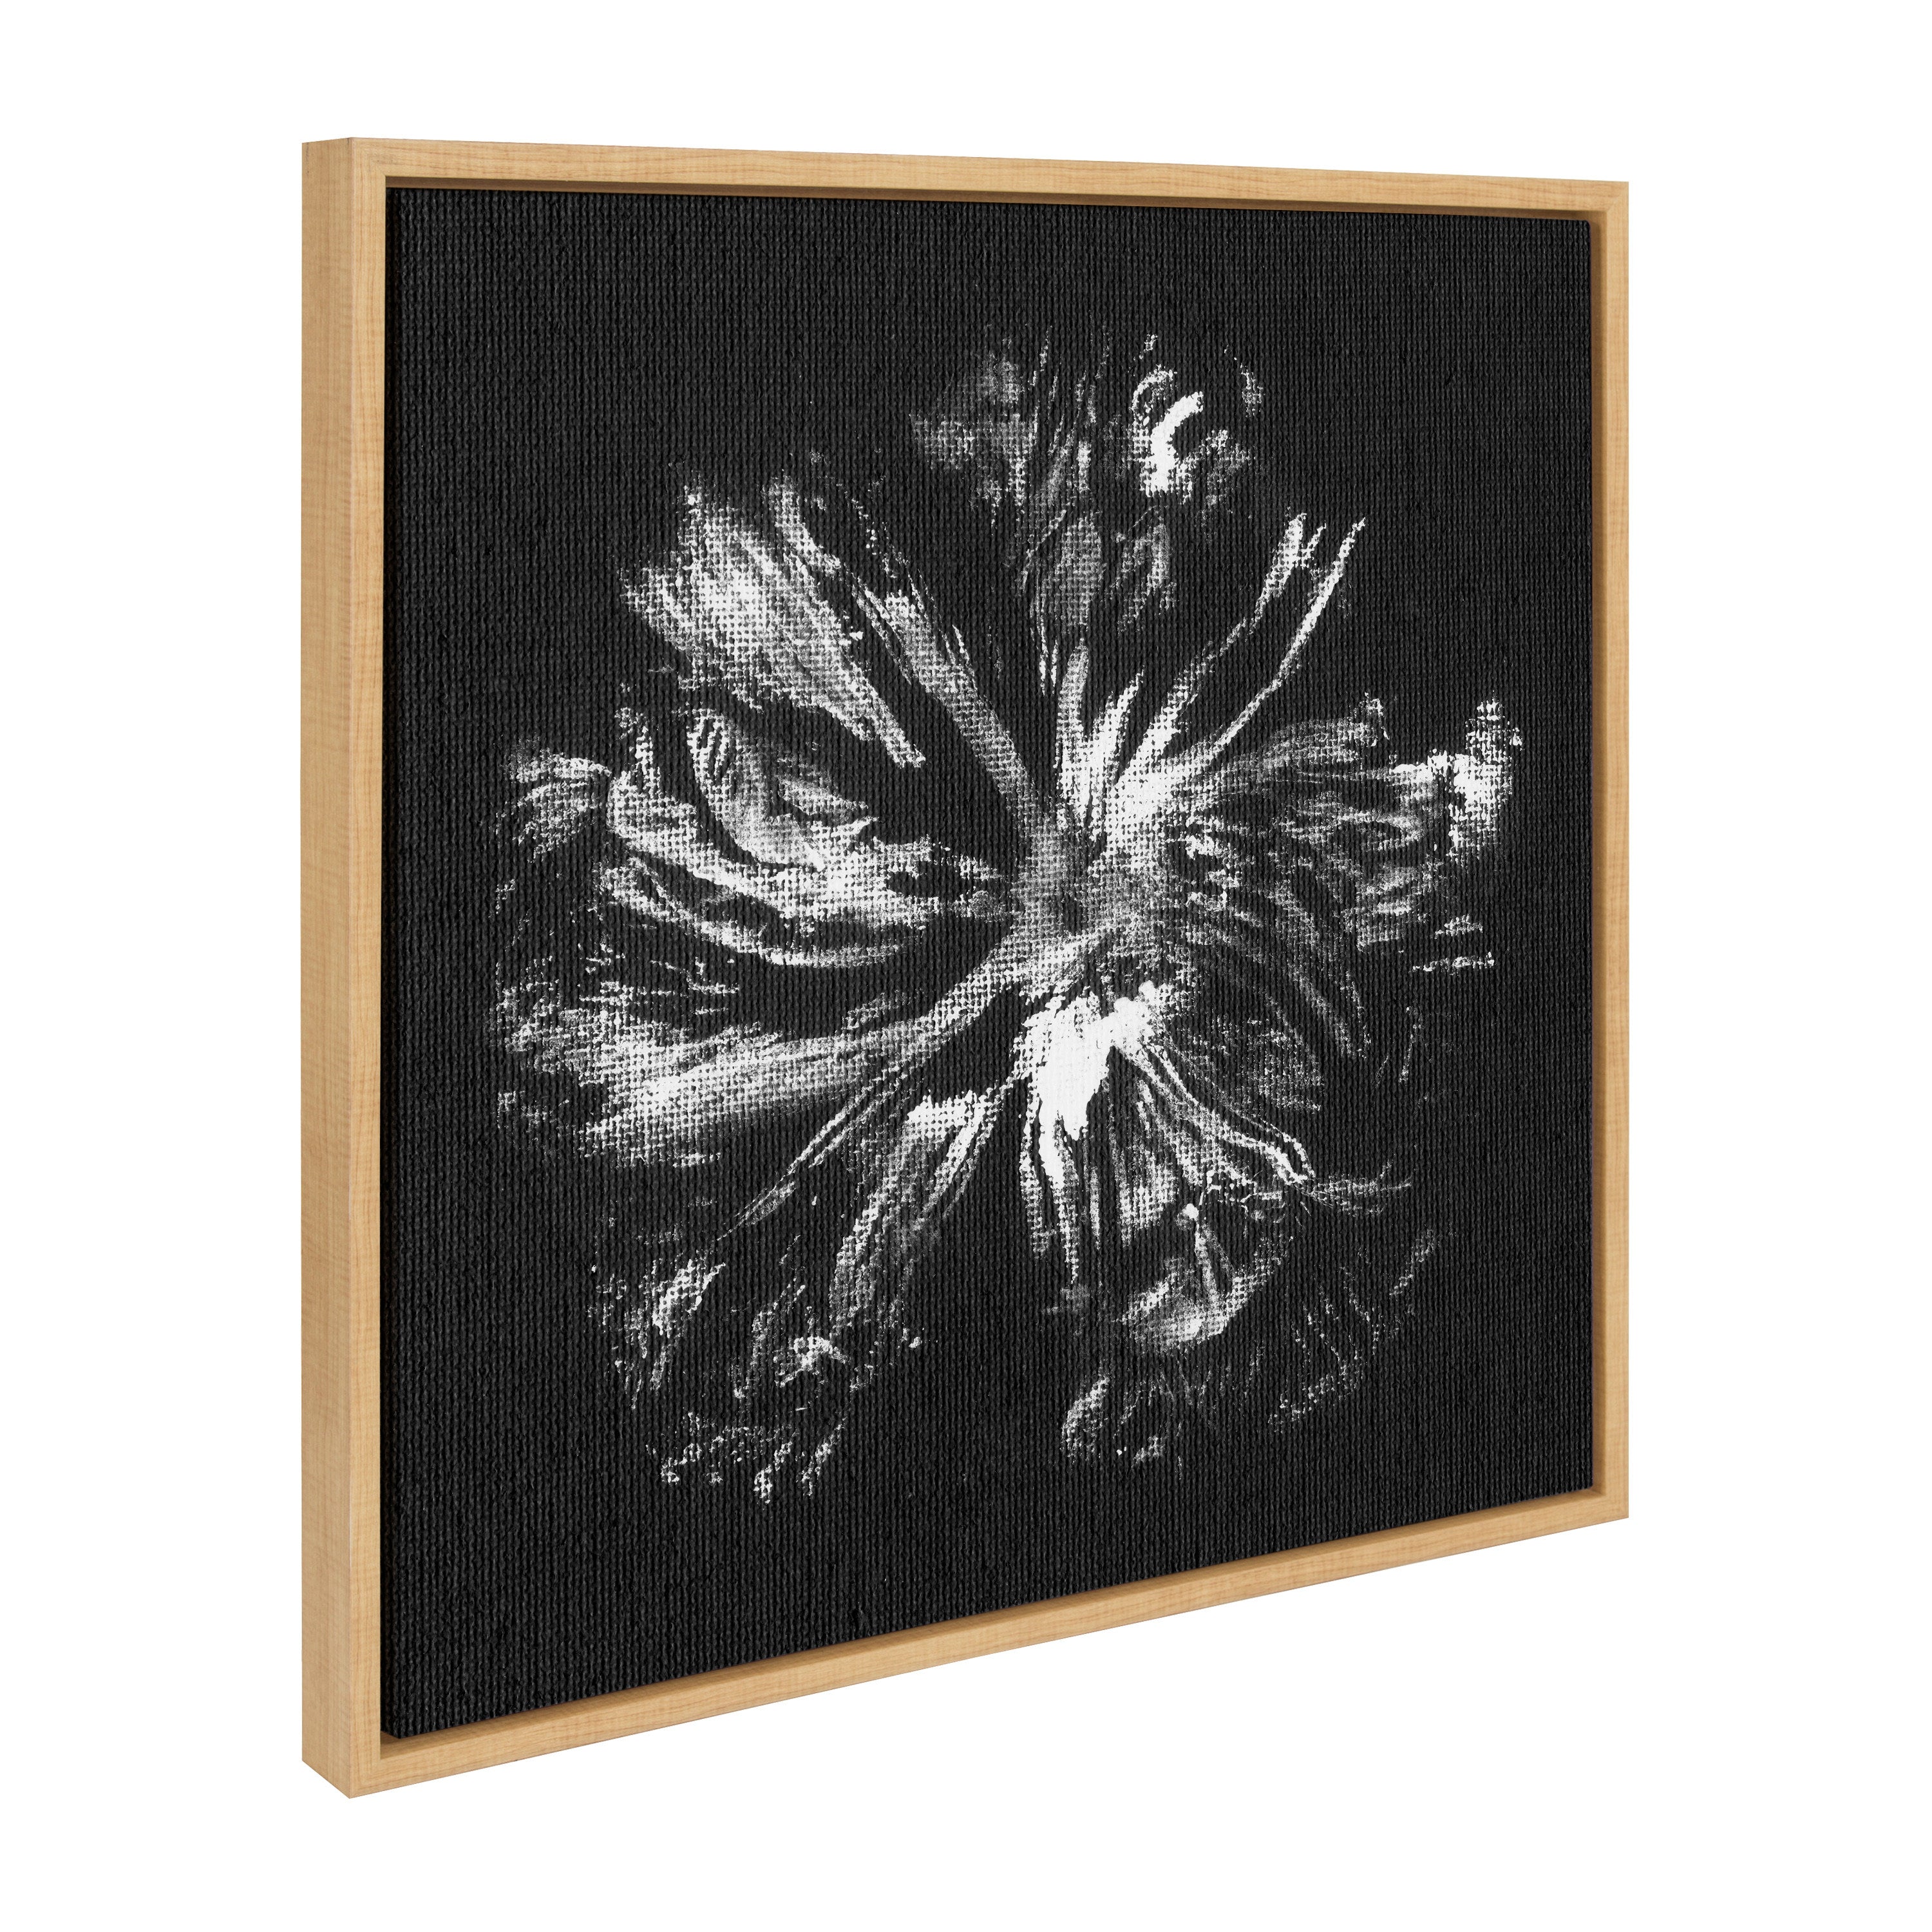 Sylvie Peony Peacock Invert BW Framed Canvas by Mentoring Positives